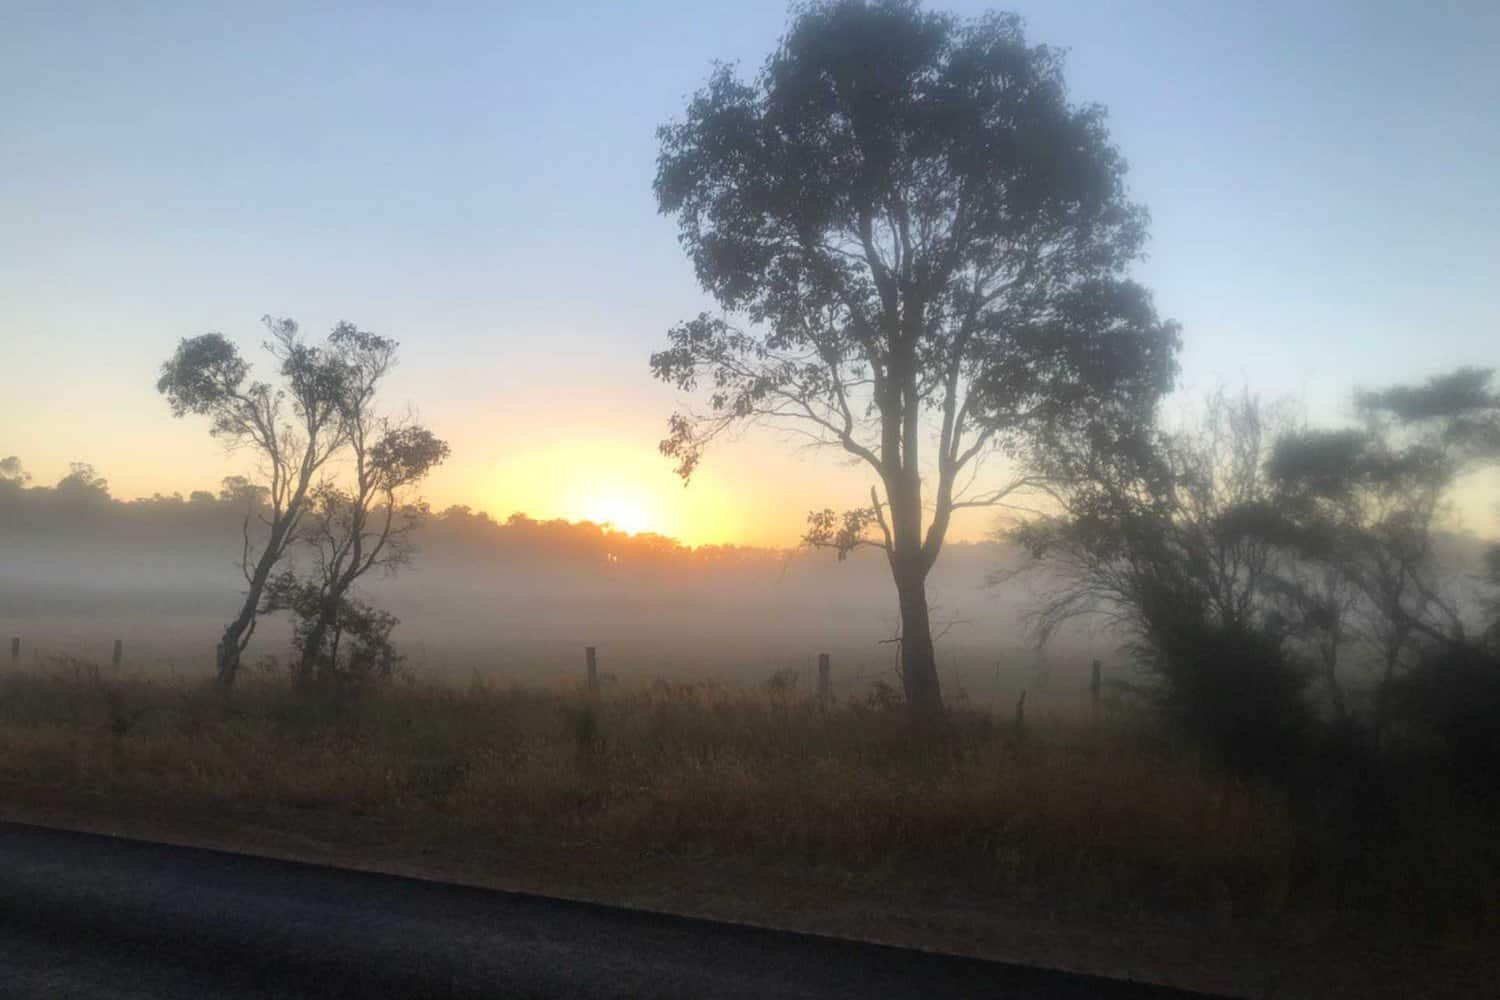 Sunrise in the Australian countryside with a misty field and eucalyptus trees silhouetted against the brightening sky, viewed from the roadside, evoking the tranquility of early morning in rural Australia.